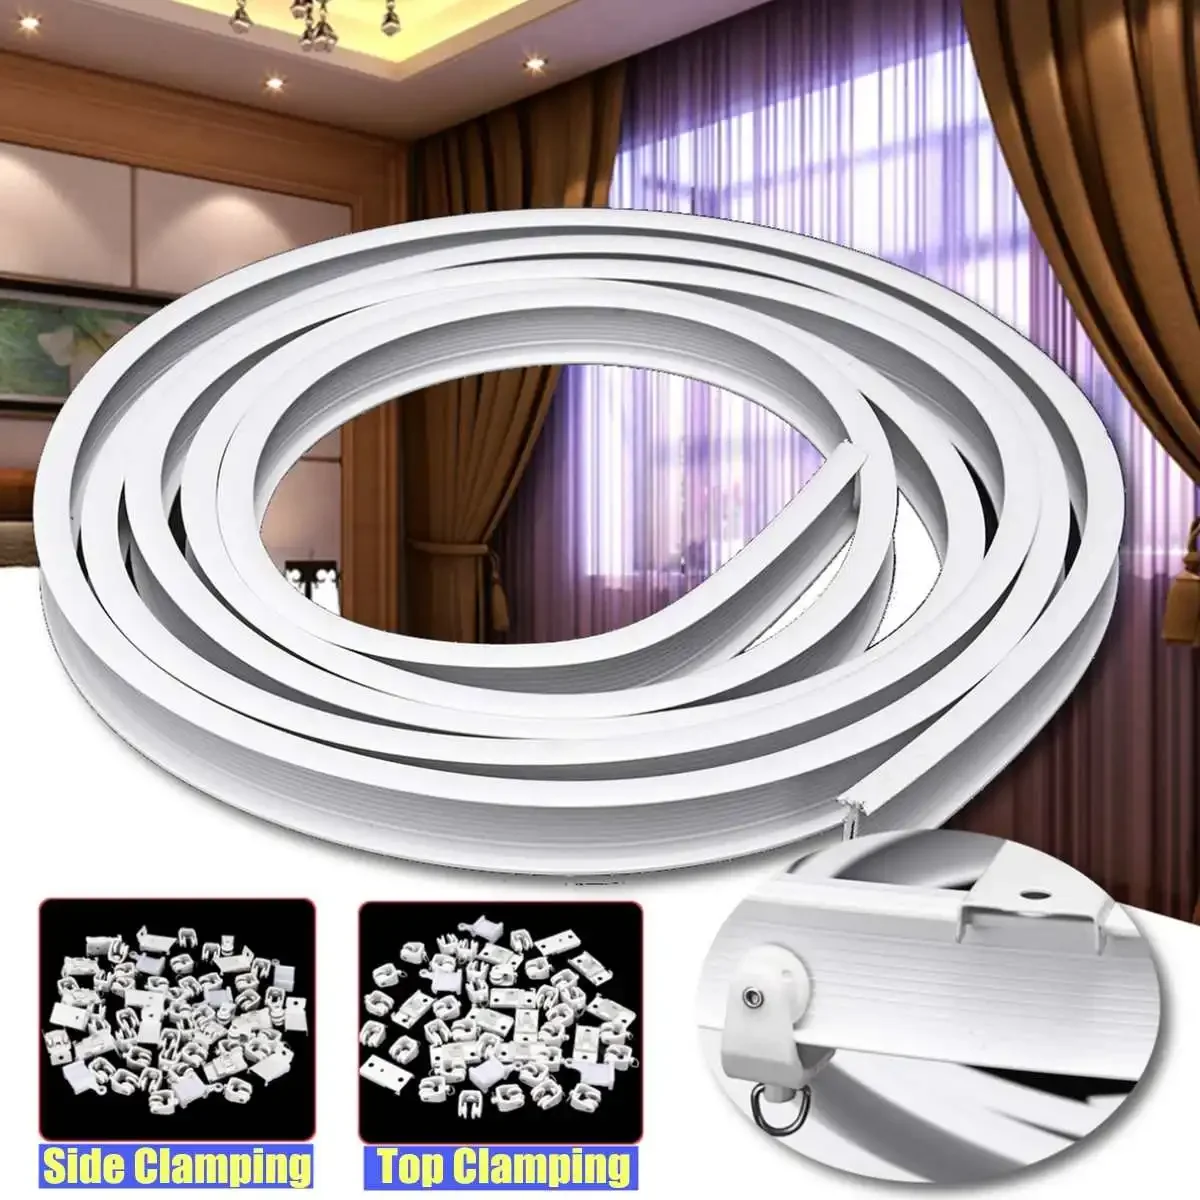 

4m Flexible Ceiling Mounted Track Rail For Straight Slide Windows Balcony Plastic Bendable Home Window Curtain Decor Accessories